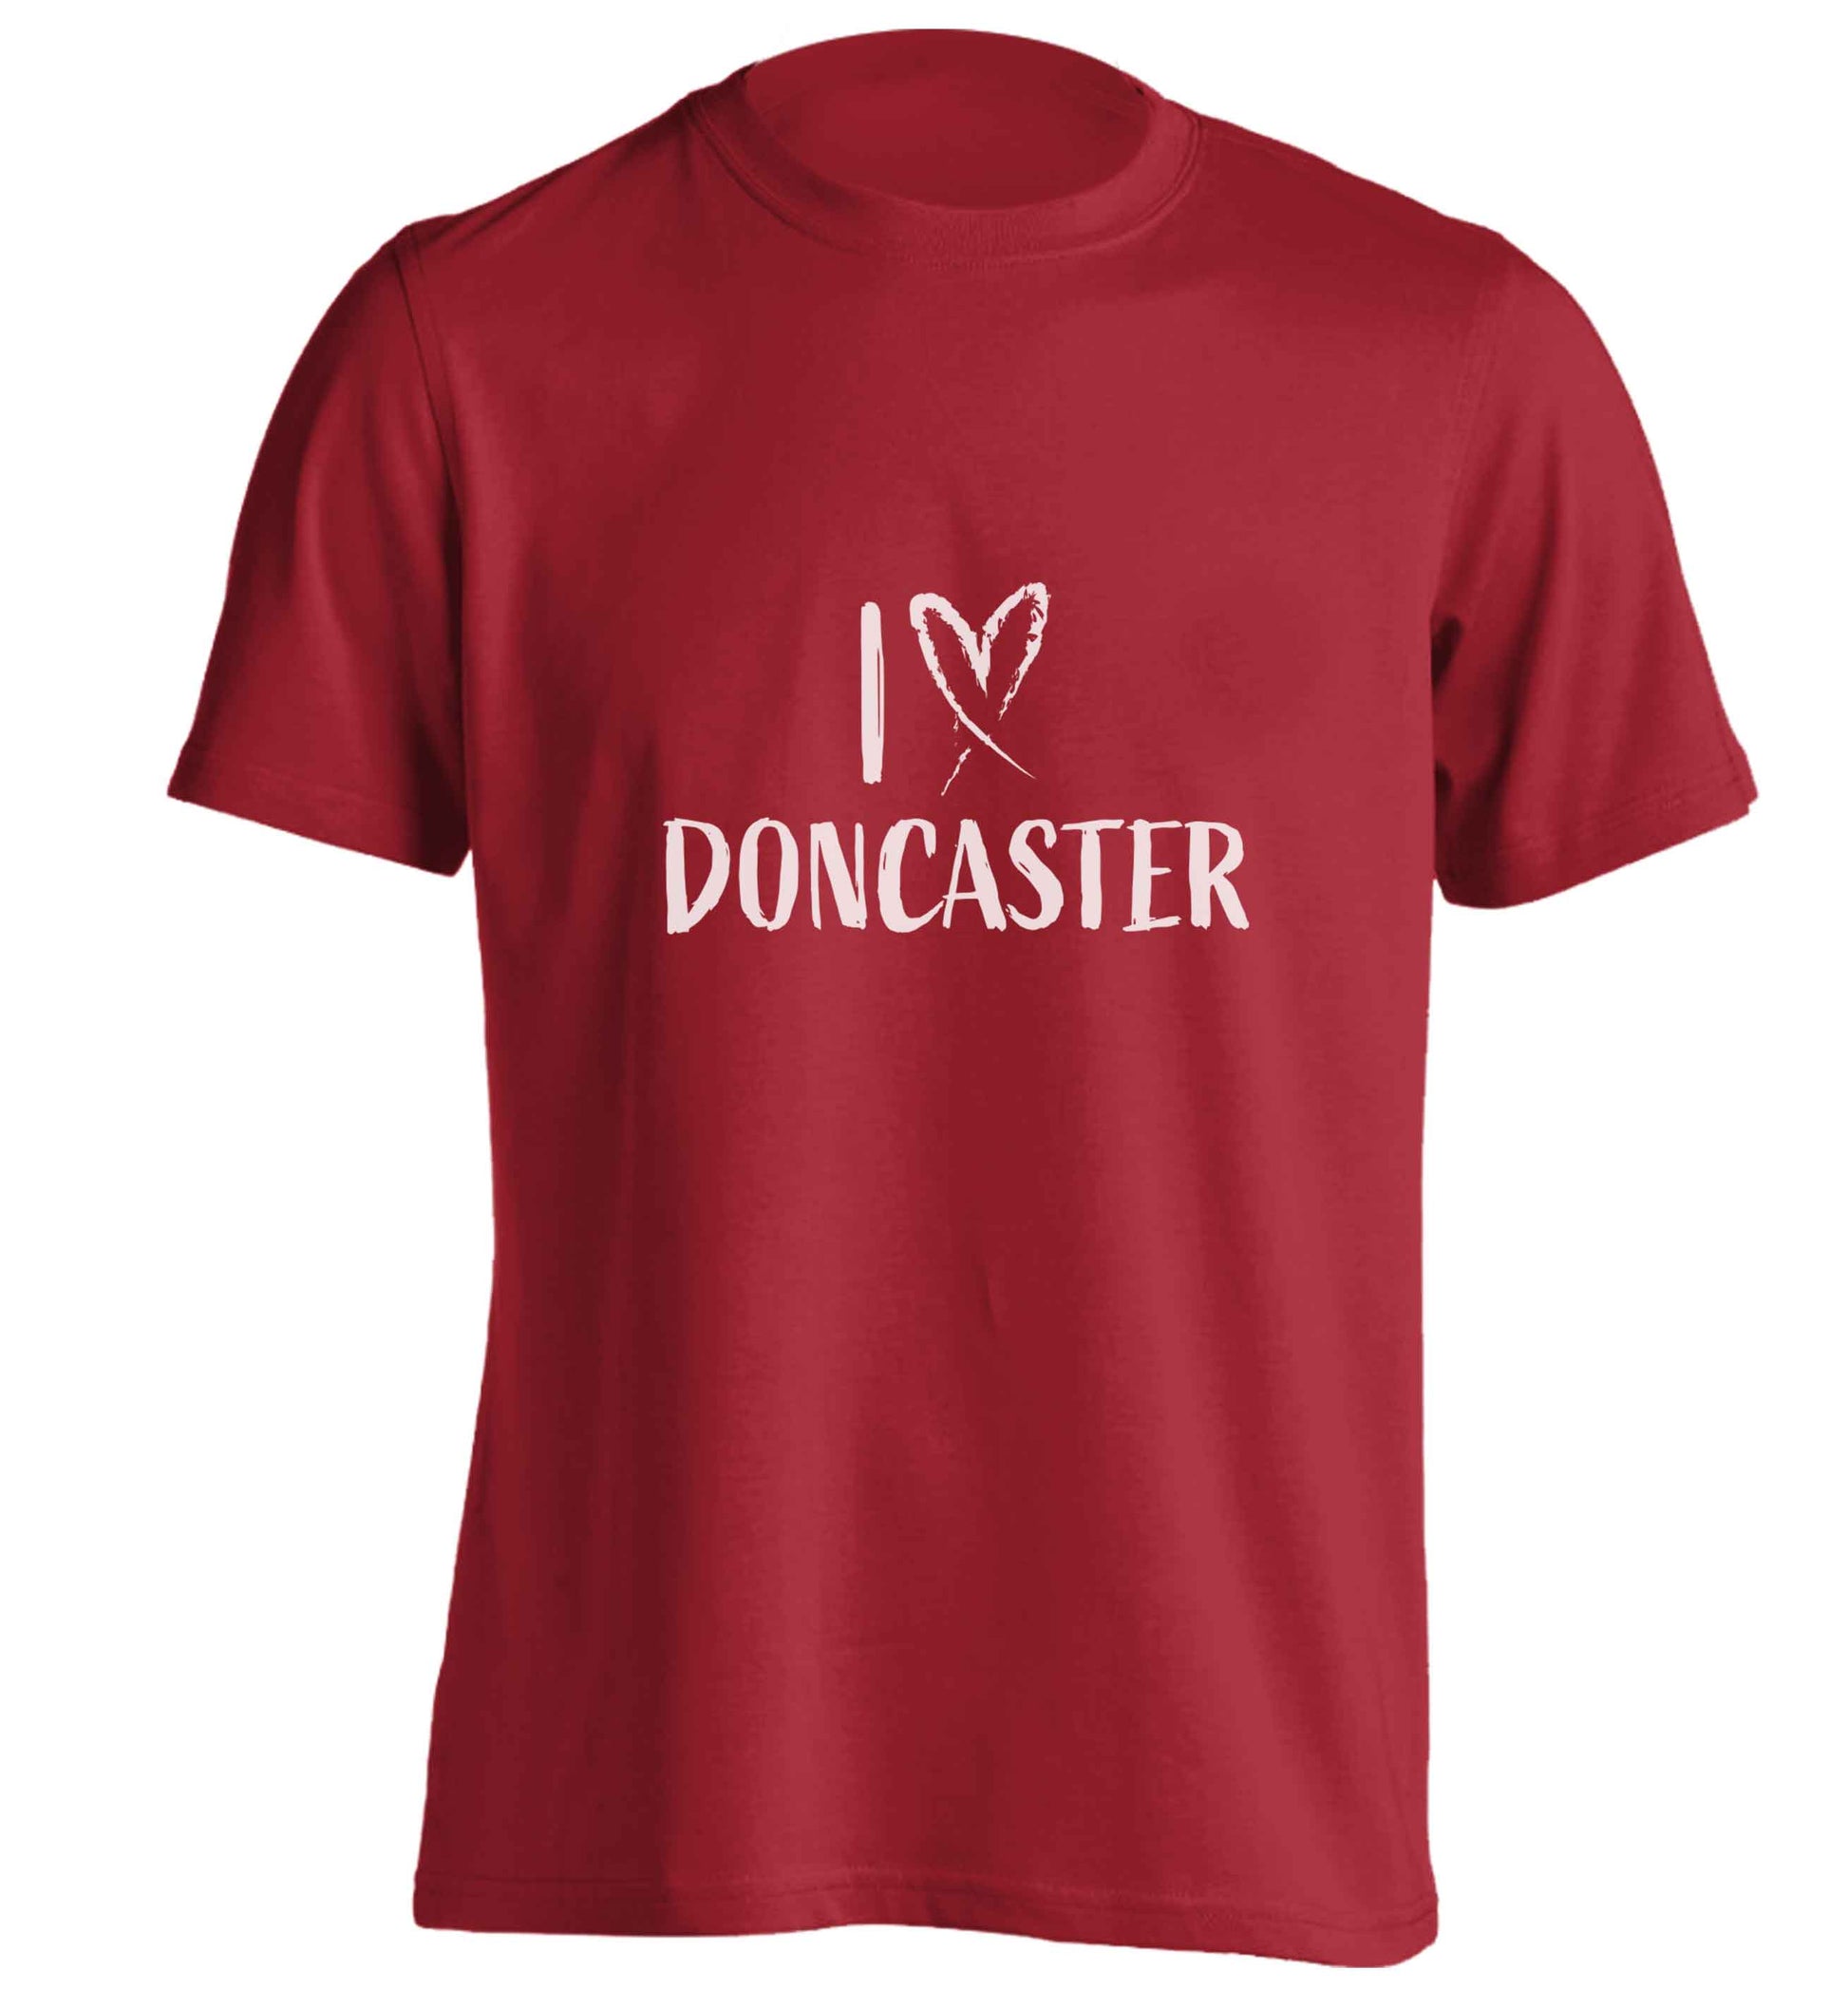 I love Doncaster adults unisex red Tshirt 2XL